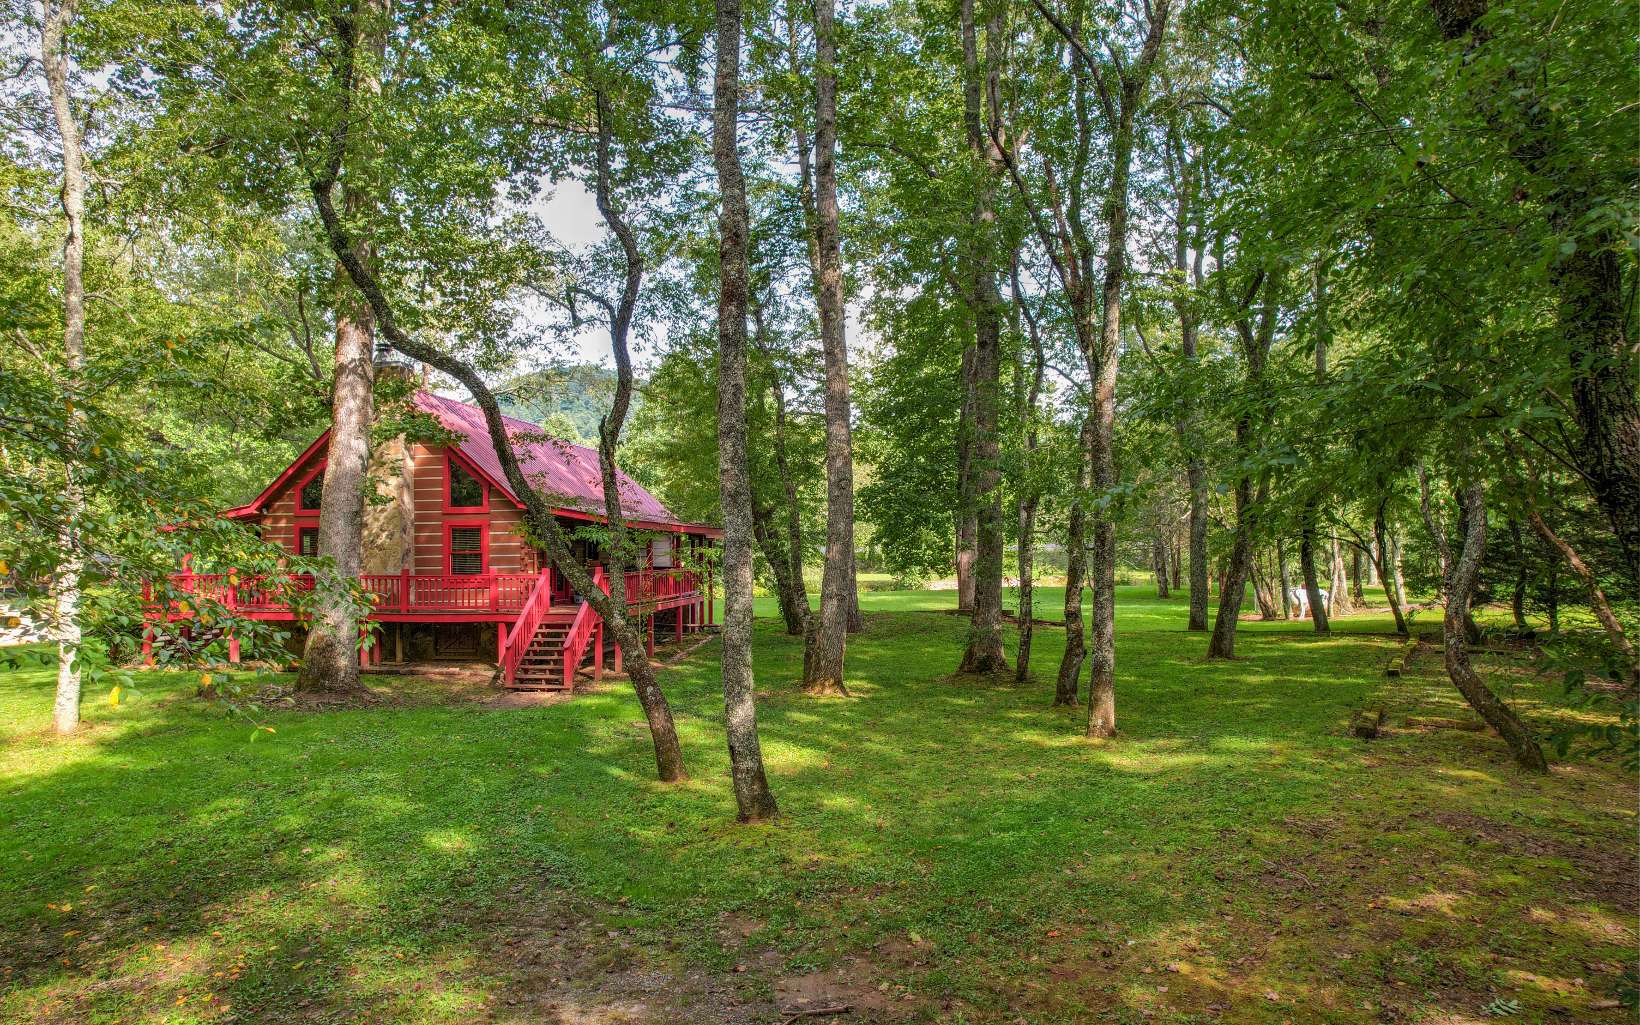 NO SHOWINGS 12/12/2022 through 1/4/2023 ENCHANTING! This beautiful solid log cabin is nestled on a level, picturesque, 1.09 acre lot with over 300 feet of frontage along the Toccoa River, known as one of the best trout fishing streams in the Southeast. You’ll love to call this cabin home. The master suite on the main floor features a large sitting area, fireplace, and french doors that open to a screened in porch that overlooks the river. A second bedroom with bath is also found on the main floor. A third bedroom is located upstairs along with a full bath. The great room features a wood burning fireplace with an adjacent dining area. The kitchen features beautiful cabinetry, granite countertops, a pantry, and seating at the bar for four. Conveniently located to many of the attractions that our mountain paradise has to offer. Most of the furnishings are available on a separate Bill of Sale